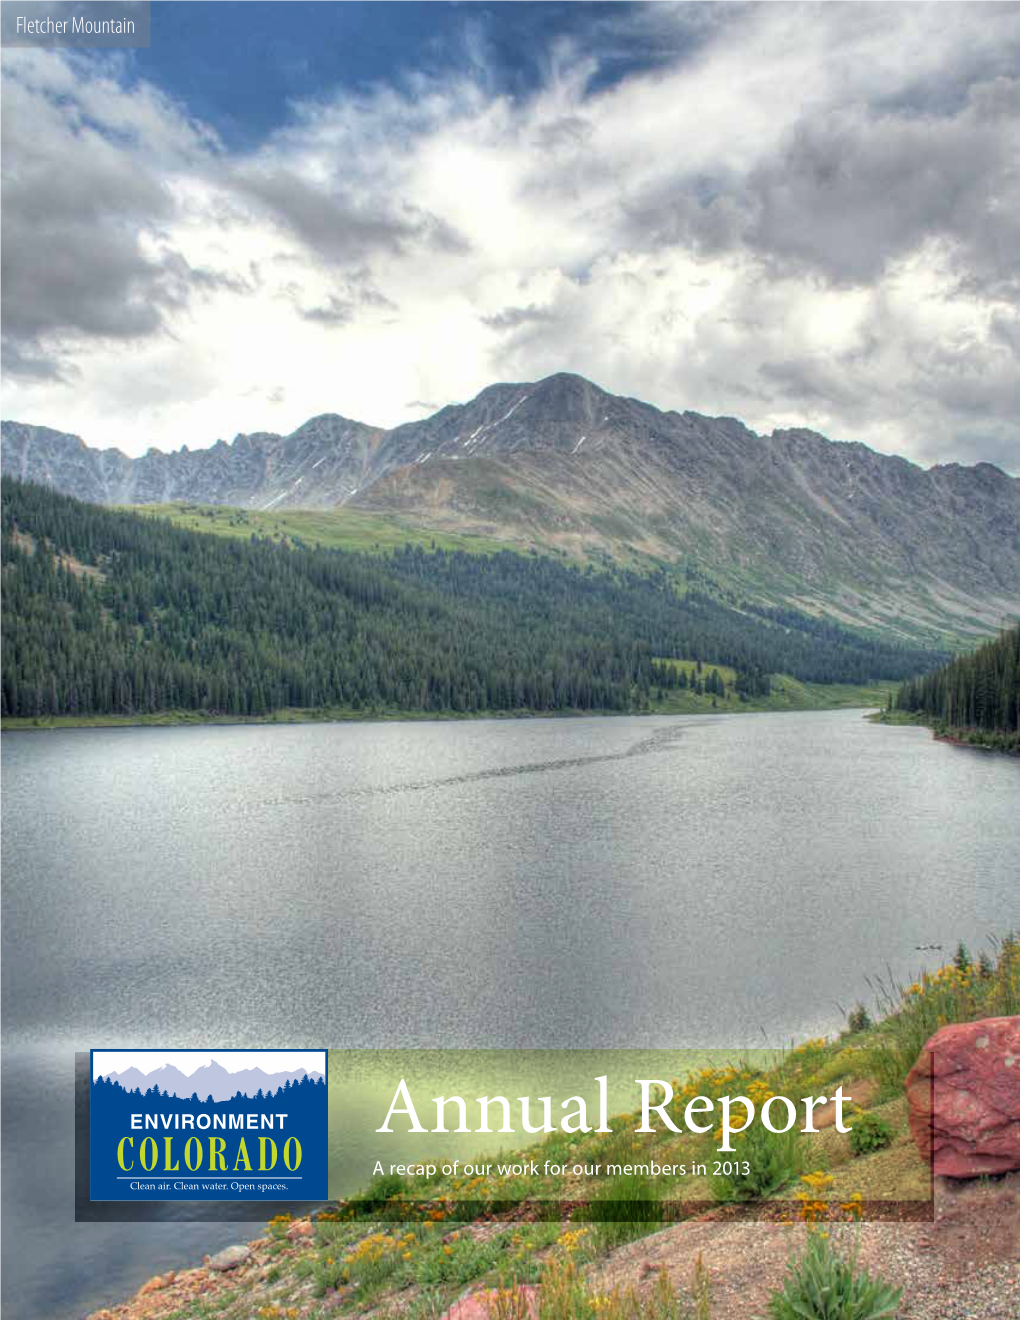 Annual Report a Recap of Our Work for Our Members in 2013 to Our Members